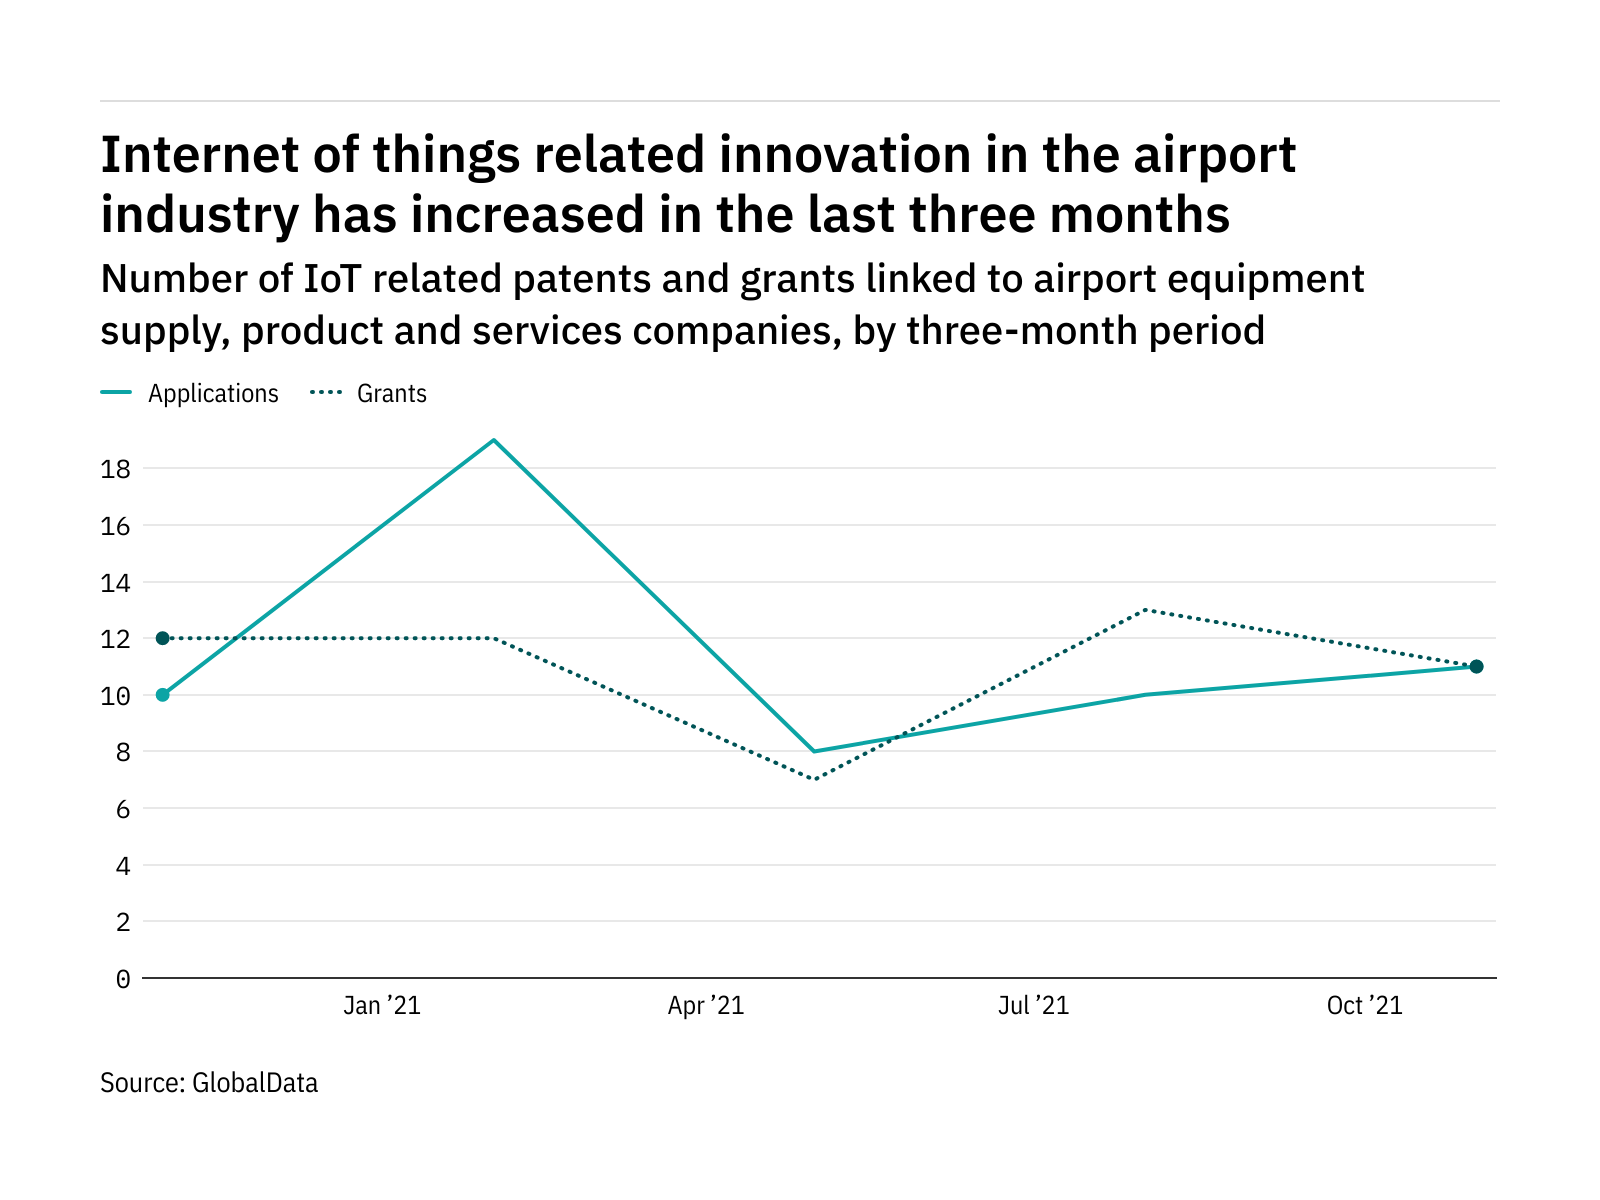 Airport industry companies are increasingly innovating in internet of things